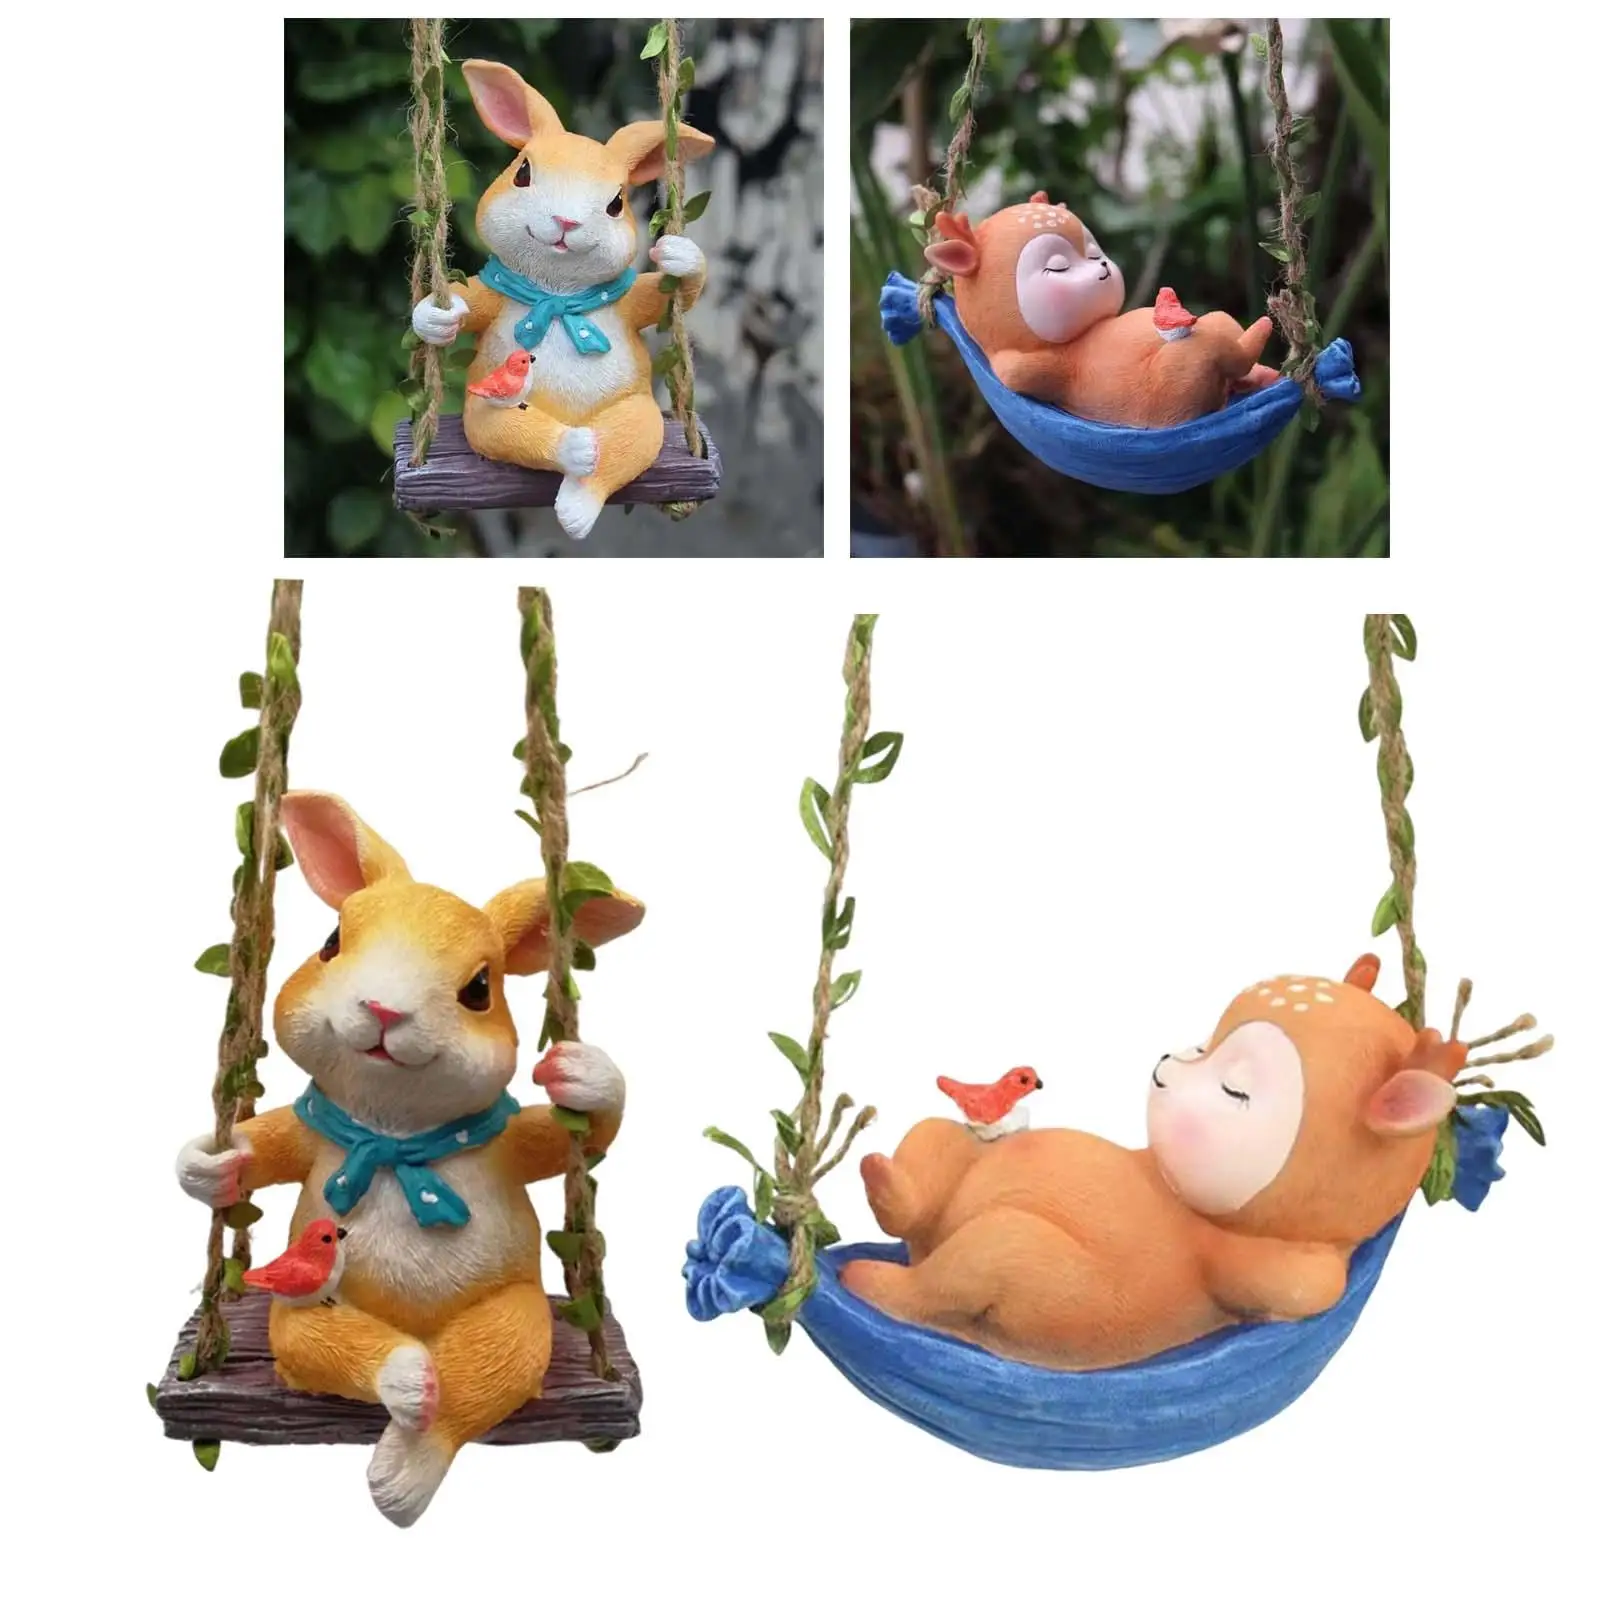 Cute Swing On Animal Statue Outdoor Animal Sculpture Ornaments Hanging Garden Statues for Shelf Desk Home Decor Ornament